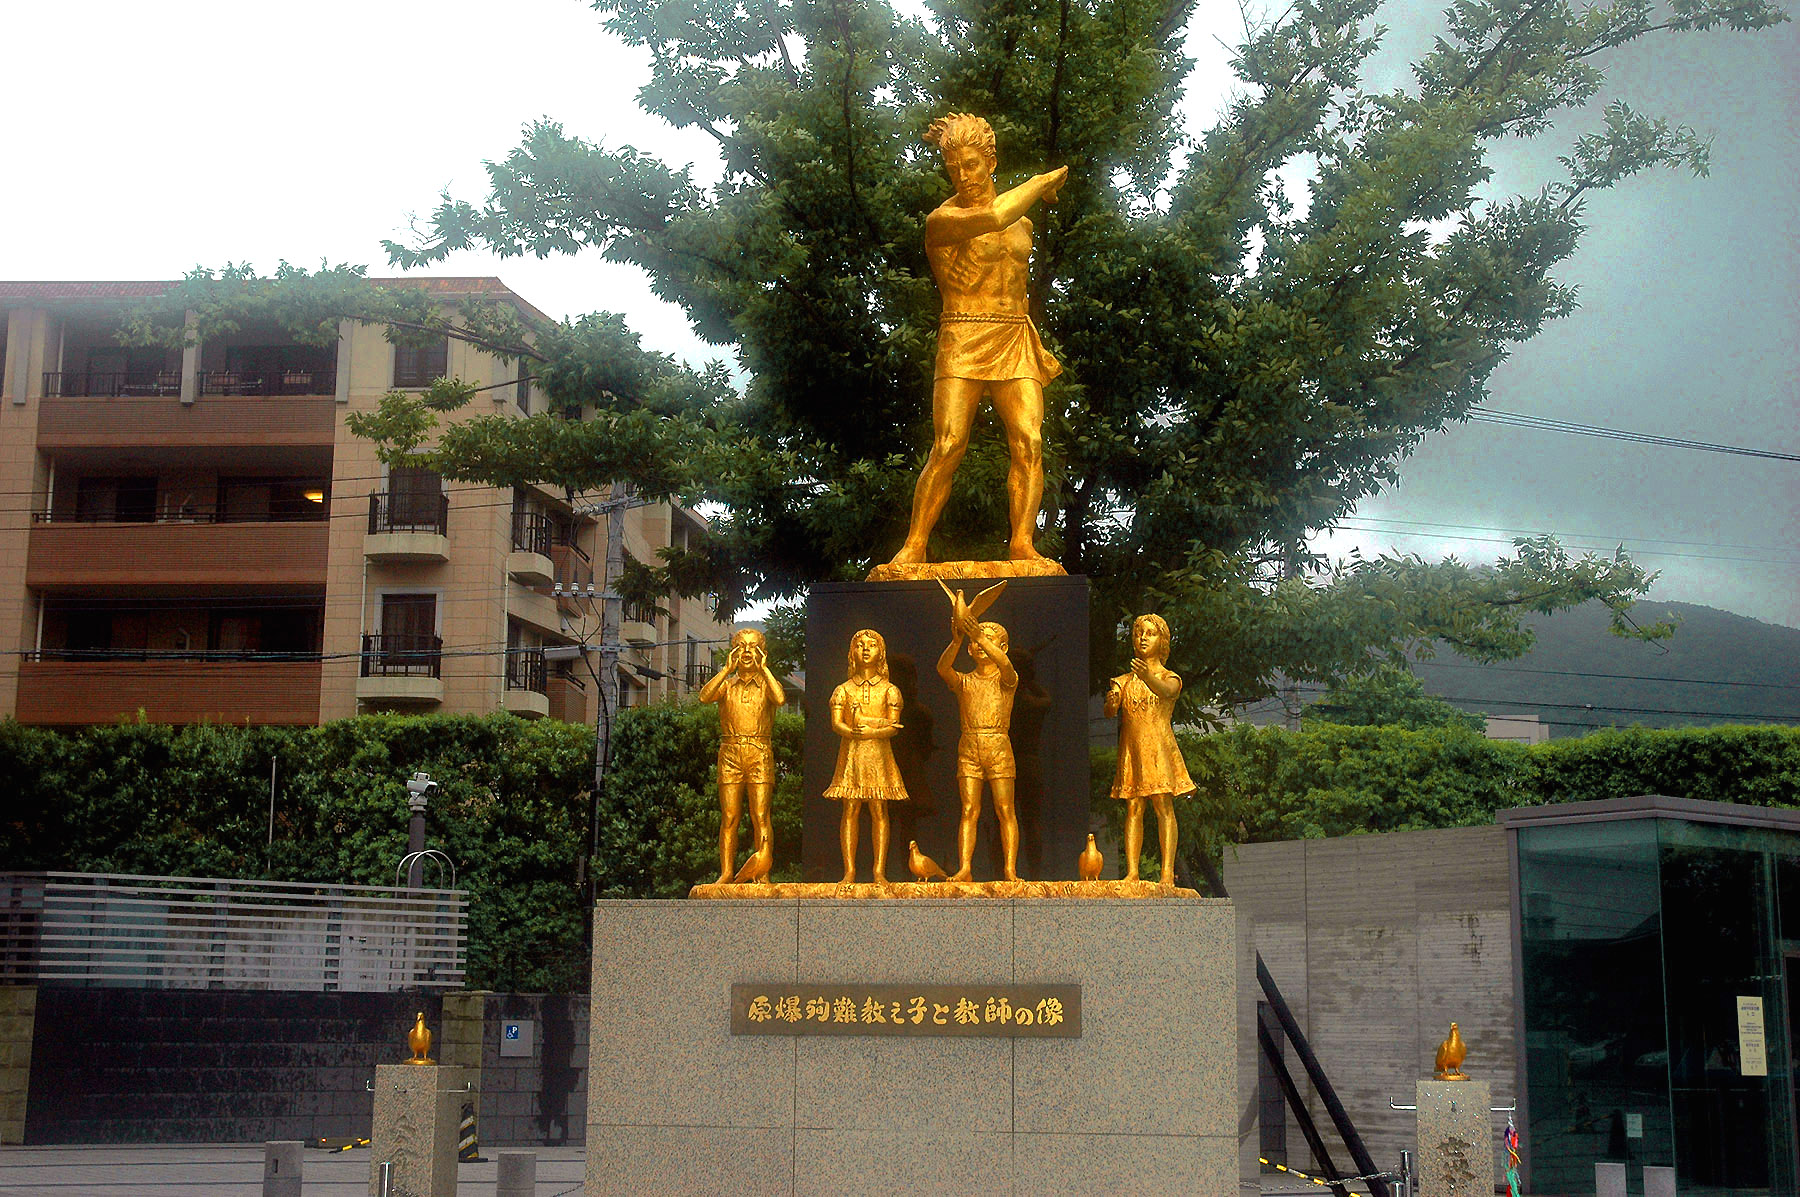 STATUE AT THE ENTRANCE TO THE NAGASAKI ATOMIC MUSEUM AND PEACE PARK